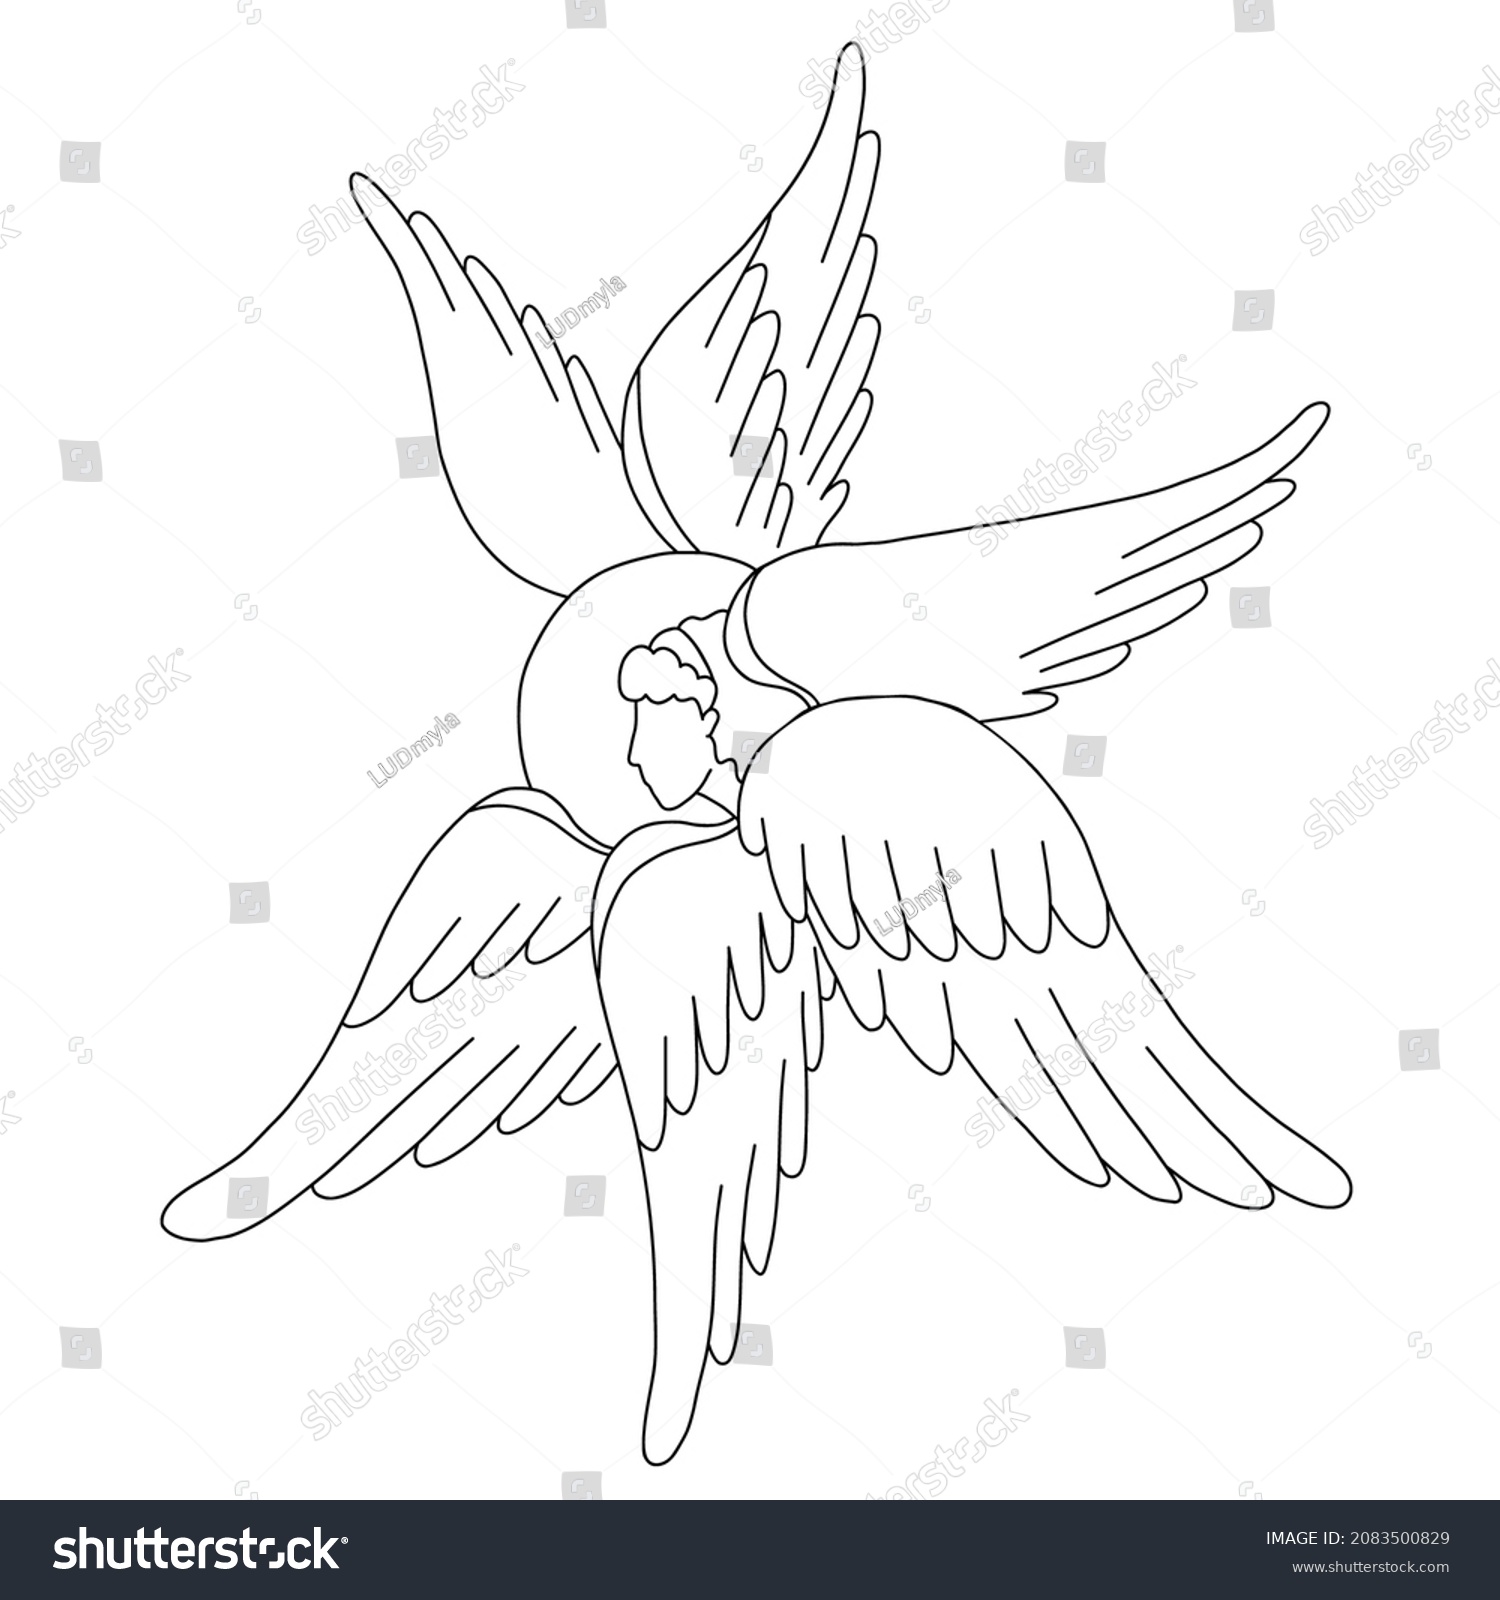 SVG of Religious symbol six winged Angel cherub. Vector illustration. Line drawing outline. heavenly character For design and decoration of religious concepts svg